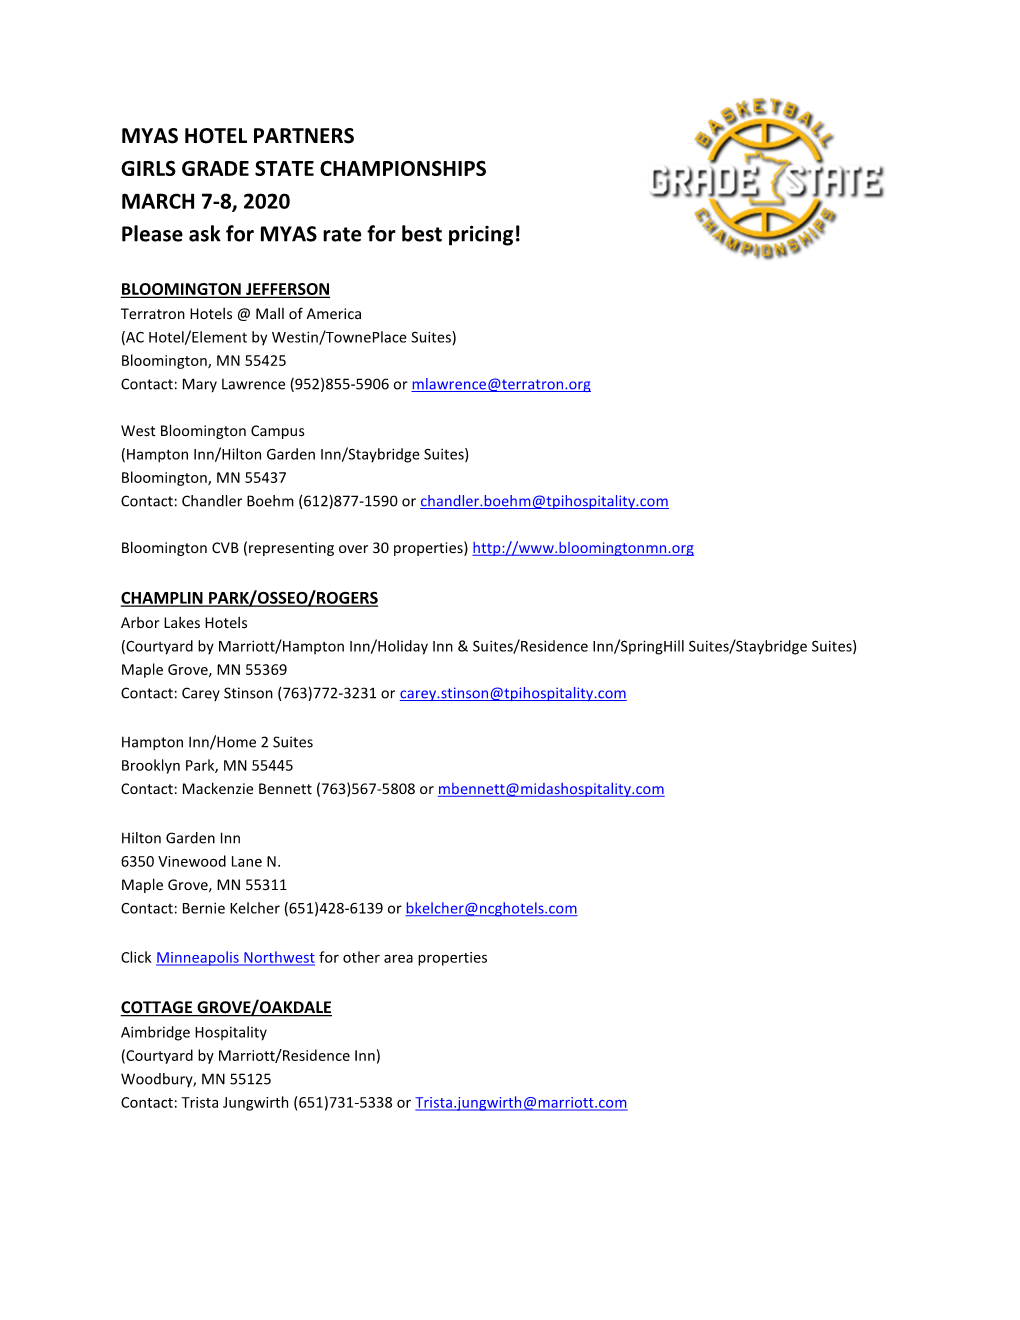 MYAS HOTEL PARTNERS GIRLS GRADE STATE CHAMPIONSHIPS MARCH 7-8, 2020 Please Ask for MYAS Rate for Best Pricing!